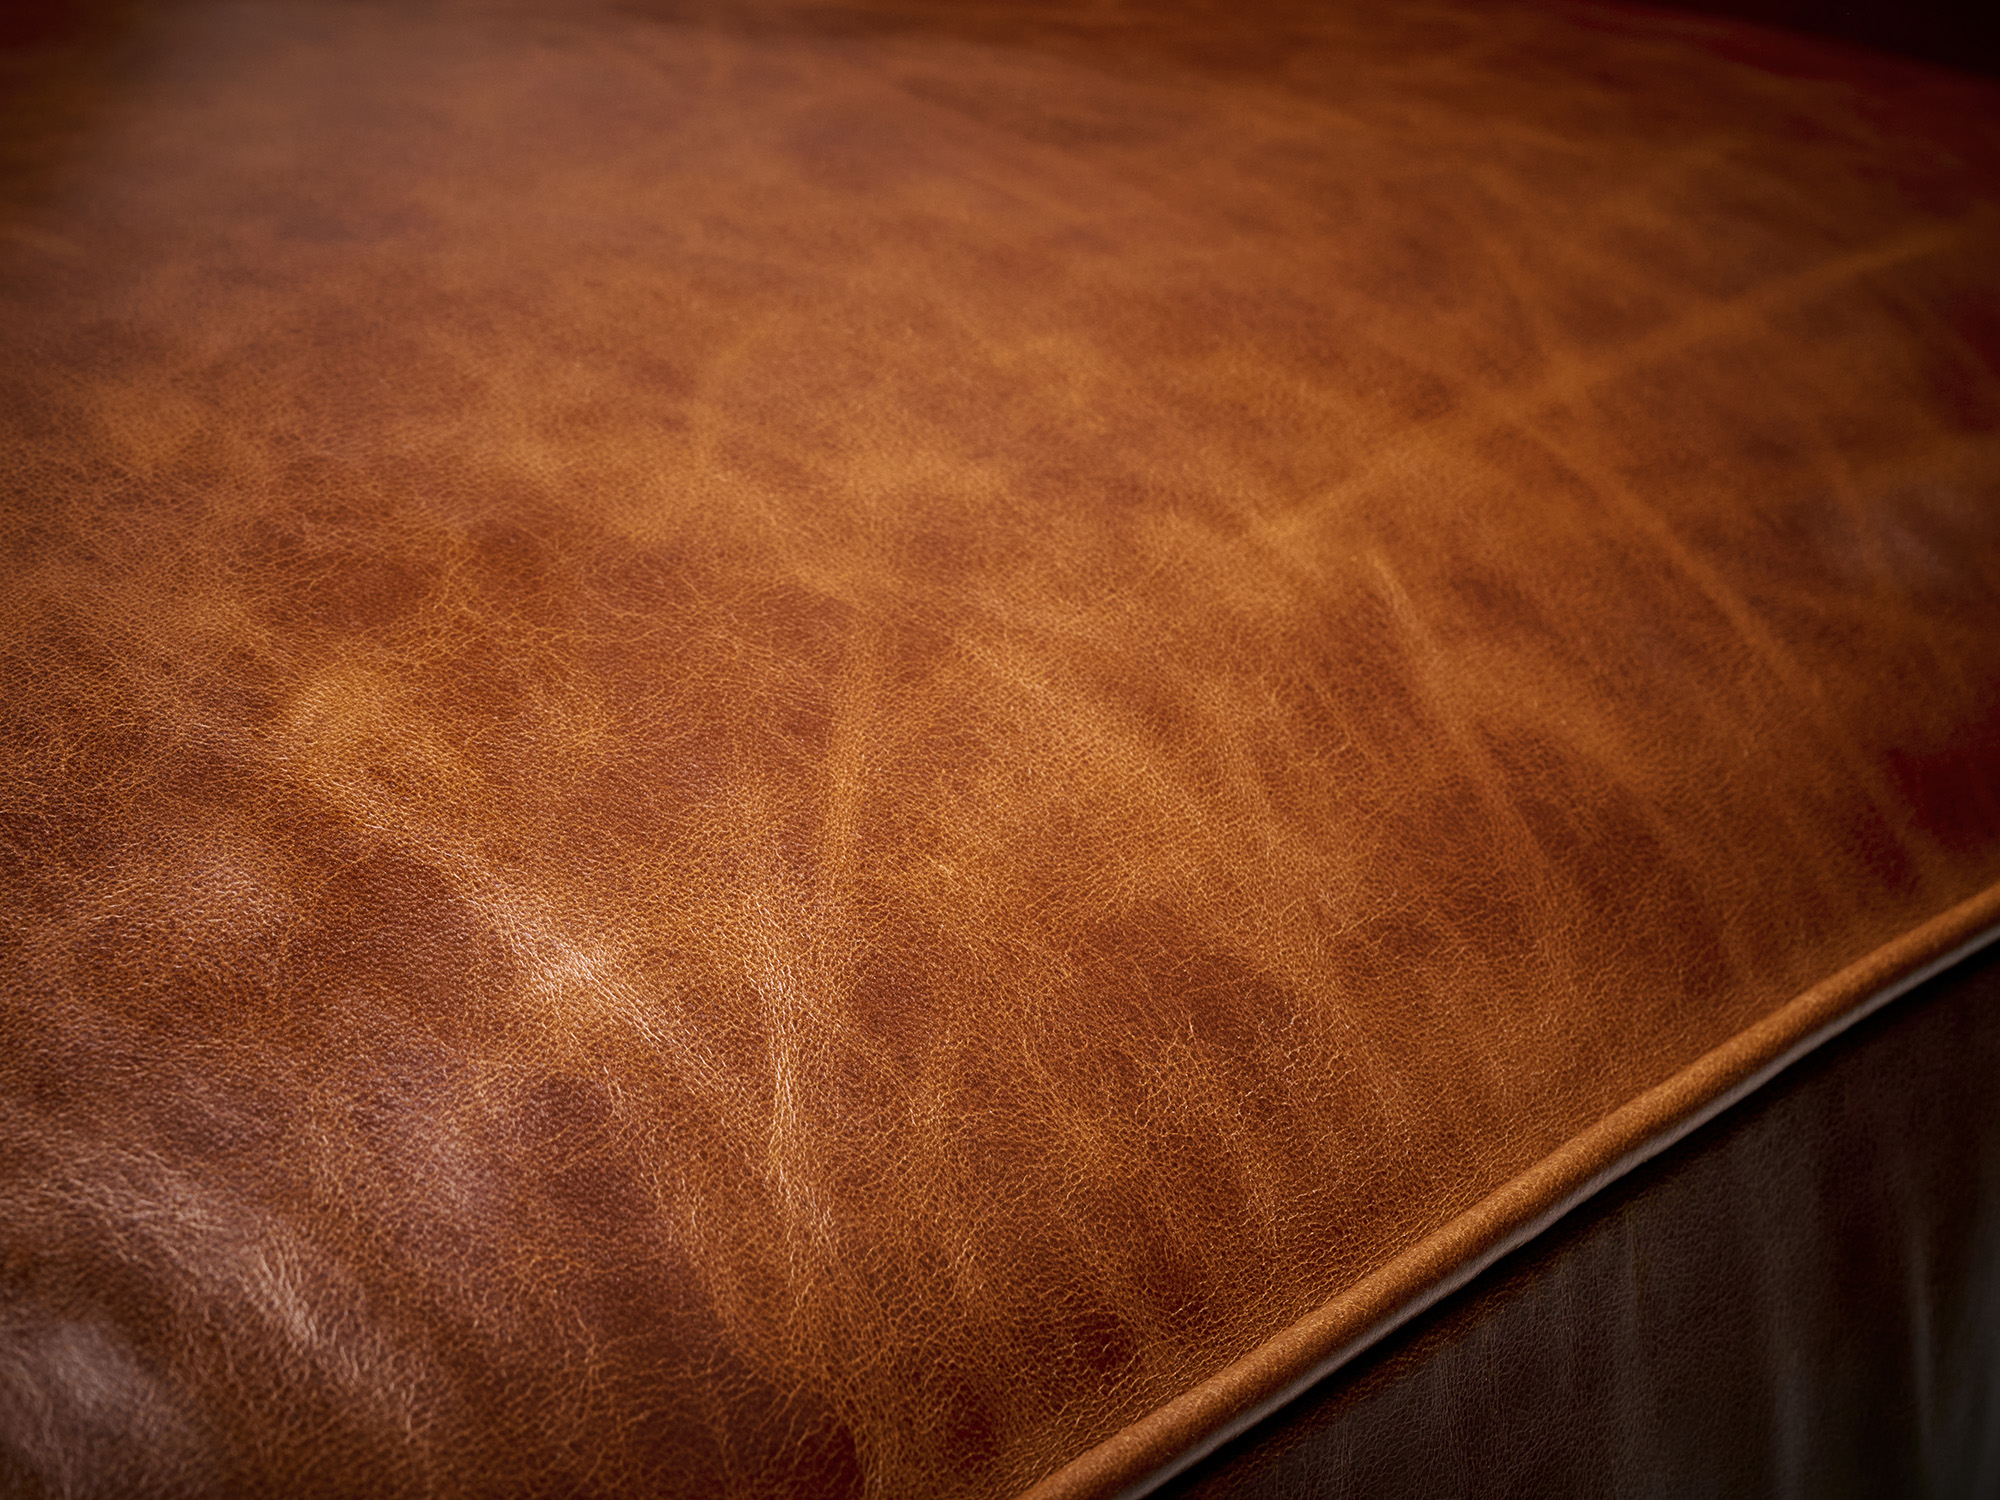 In stock - Atlas Leather Chair in Mont Blanc Caramel Leather - One only - detail 2